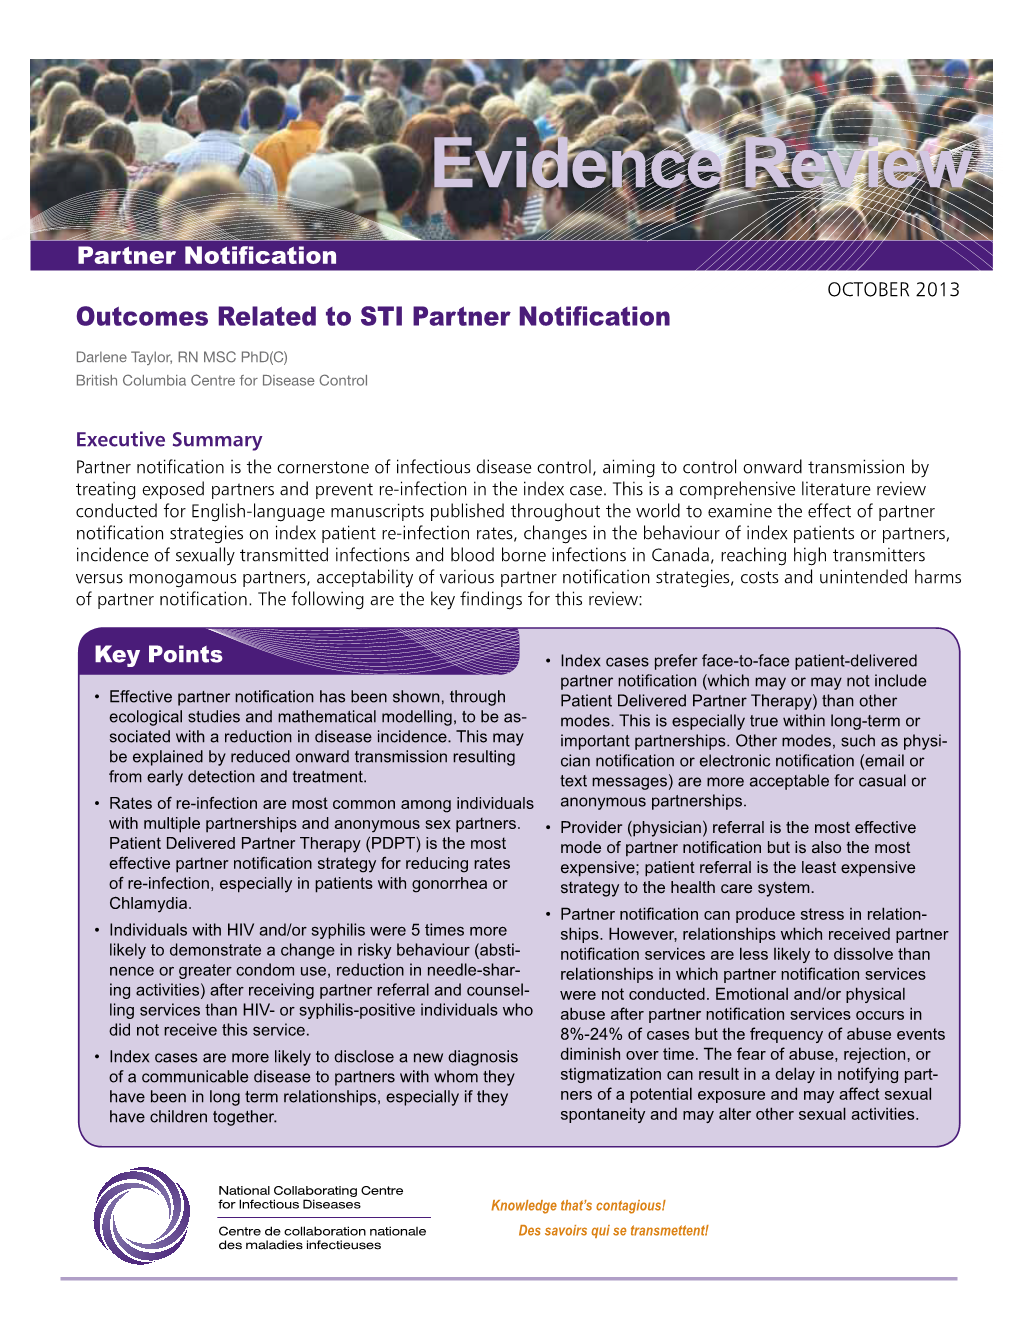 Outcomes Related to STI Partner Notification